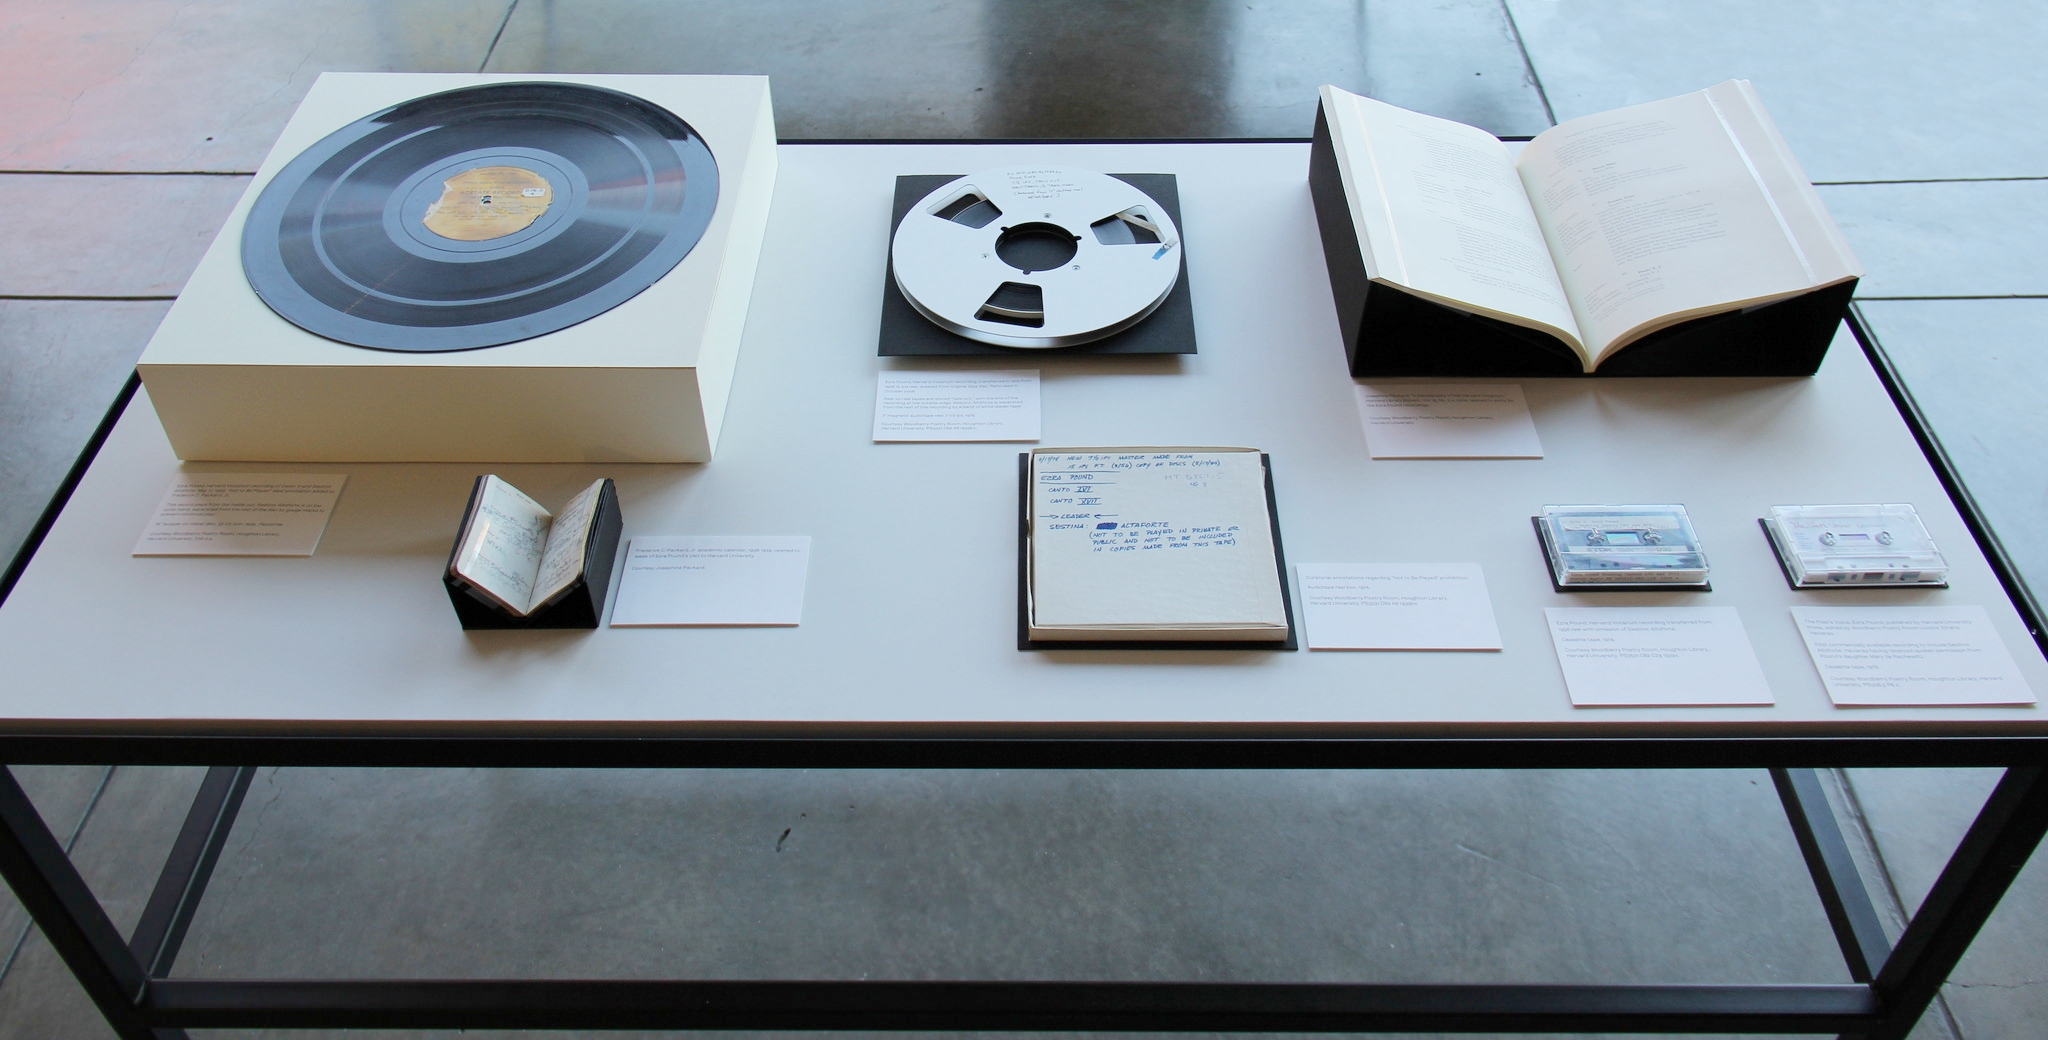   Damon Krukowski:&nbsp;NOT TO BE PLAYED  was a multifaceted exhibition featuring archival materials, a performance, and a vinyl record publication that combined revived an obscure audio recording made by Ezra Pound at Harvard University in 1939, org